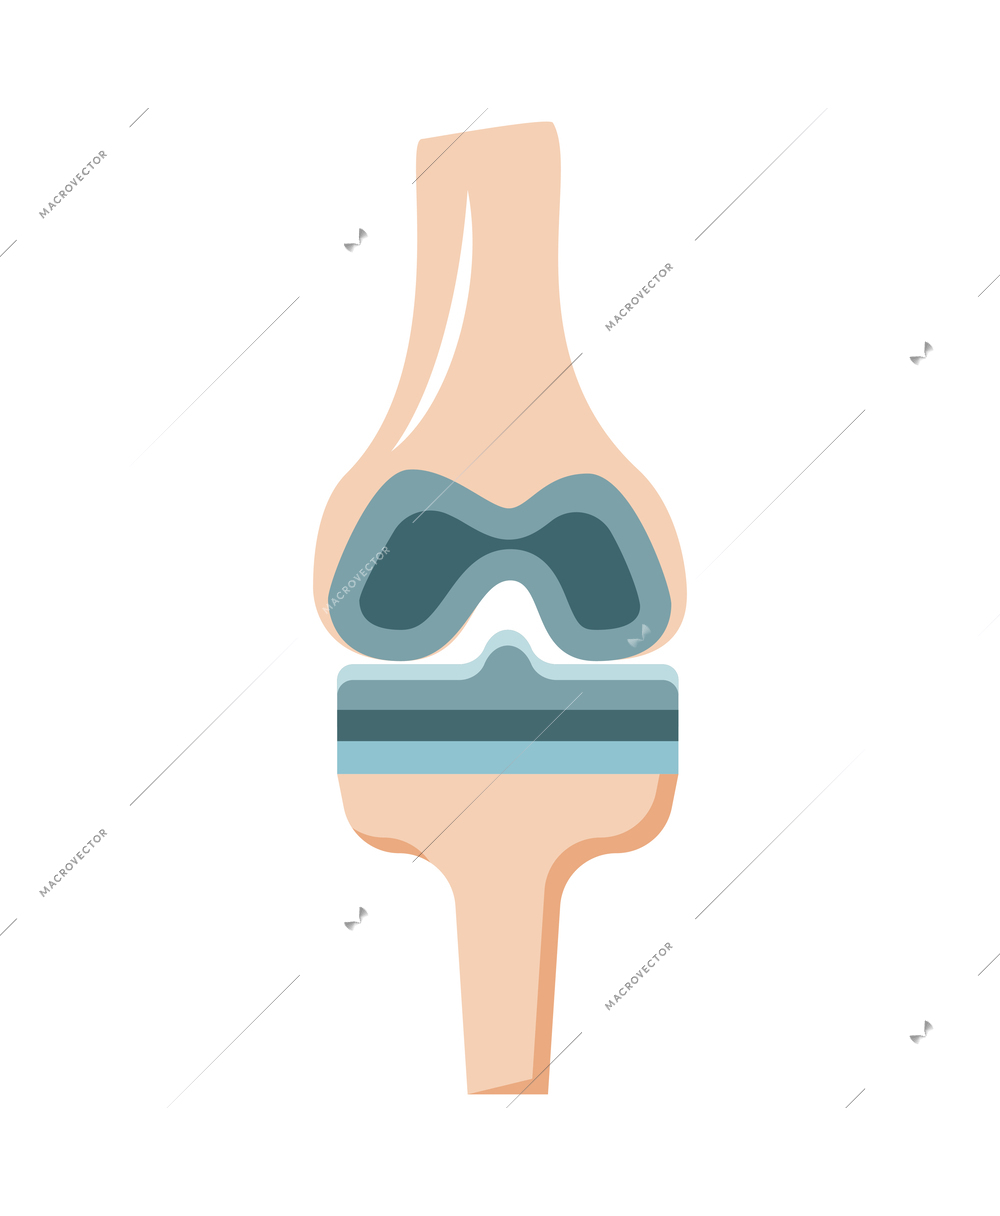 Joint prosthesis knee replacement flat icon vector illustration